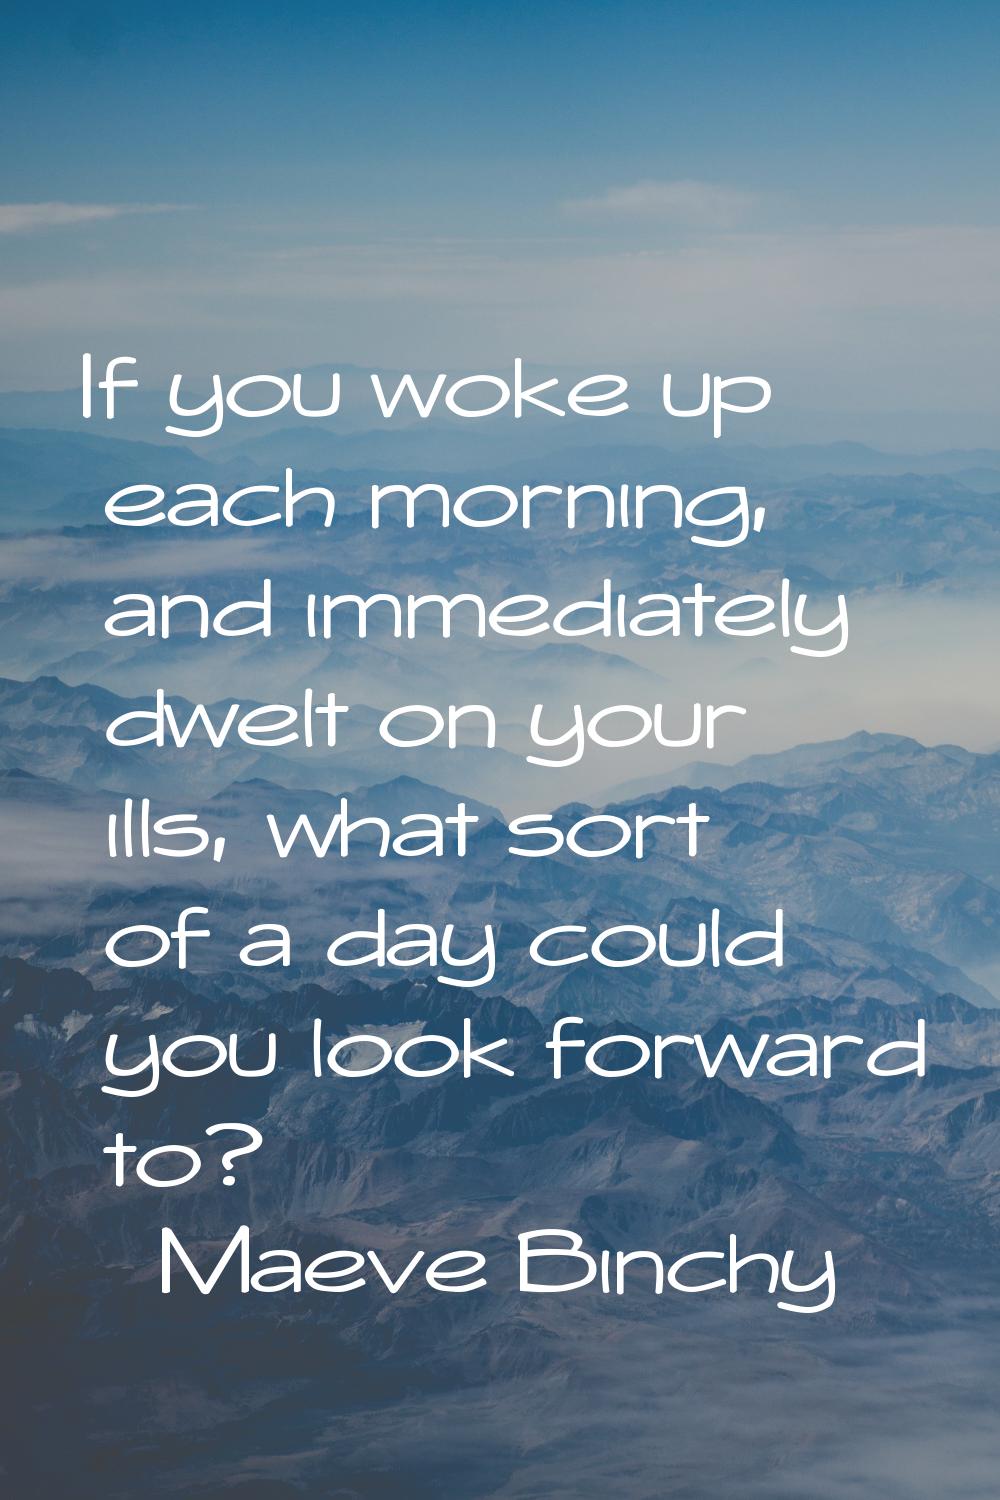 If you woke up each morning, and immediately dwelt on your ills, what sort of a day could you look 